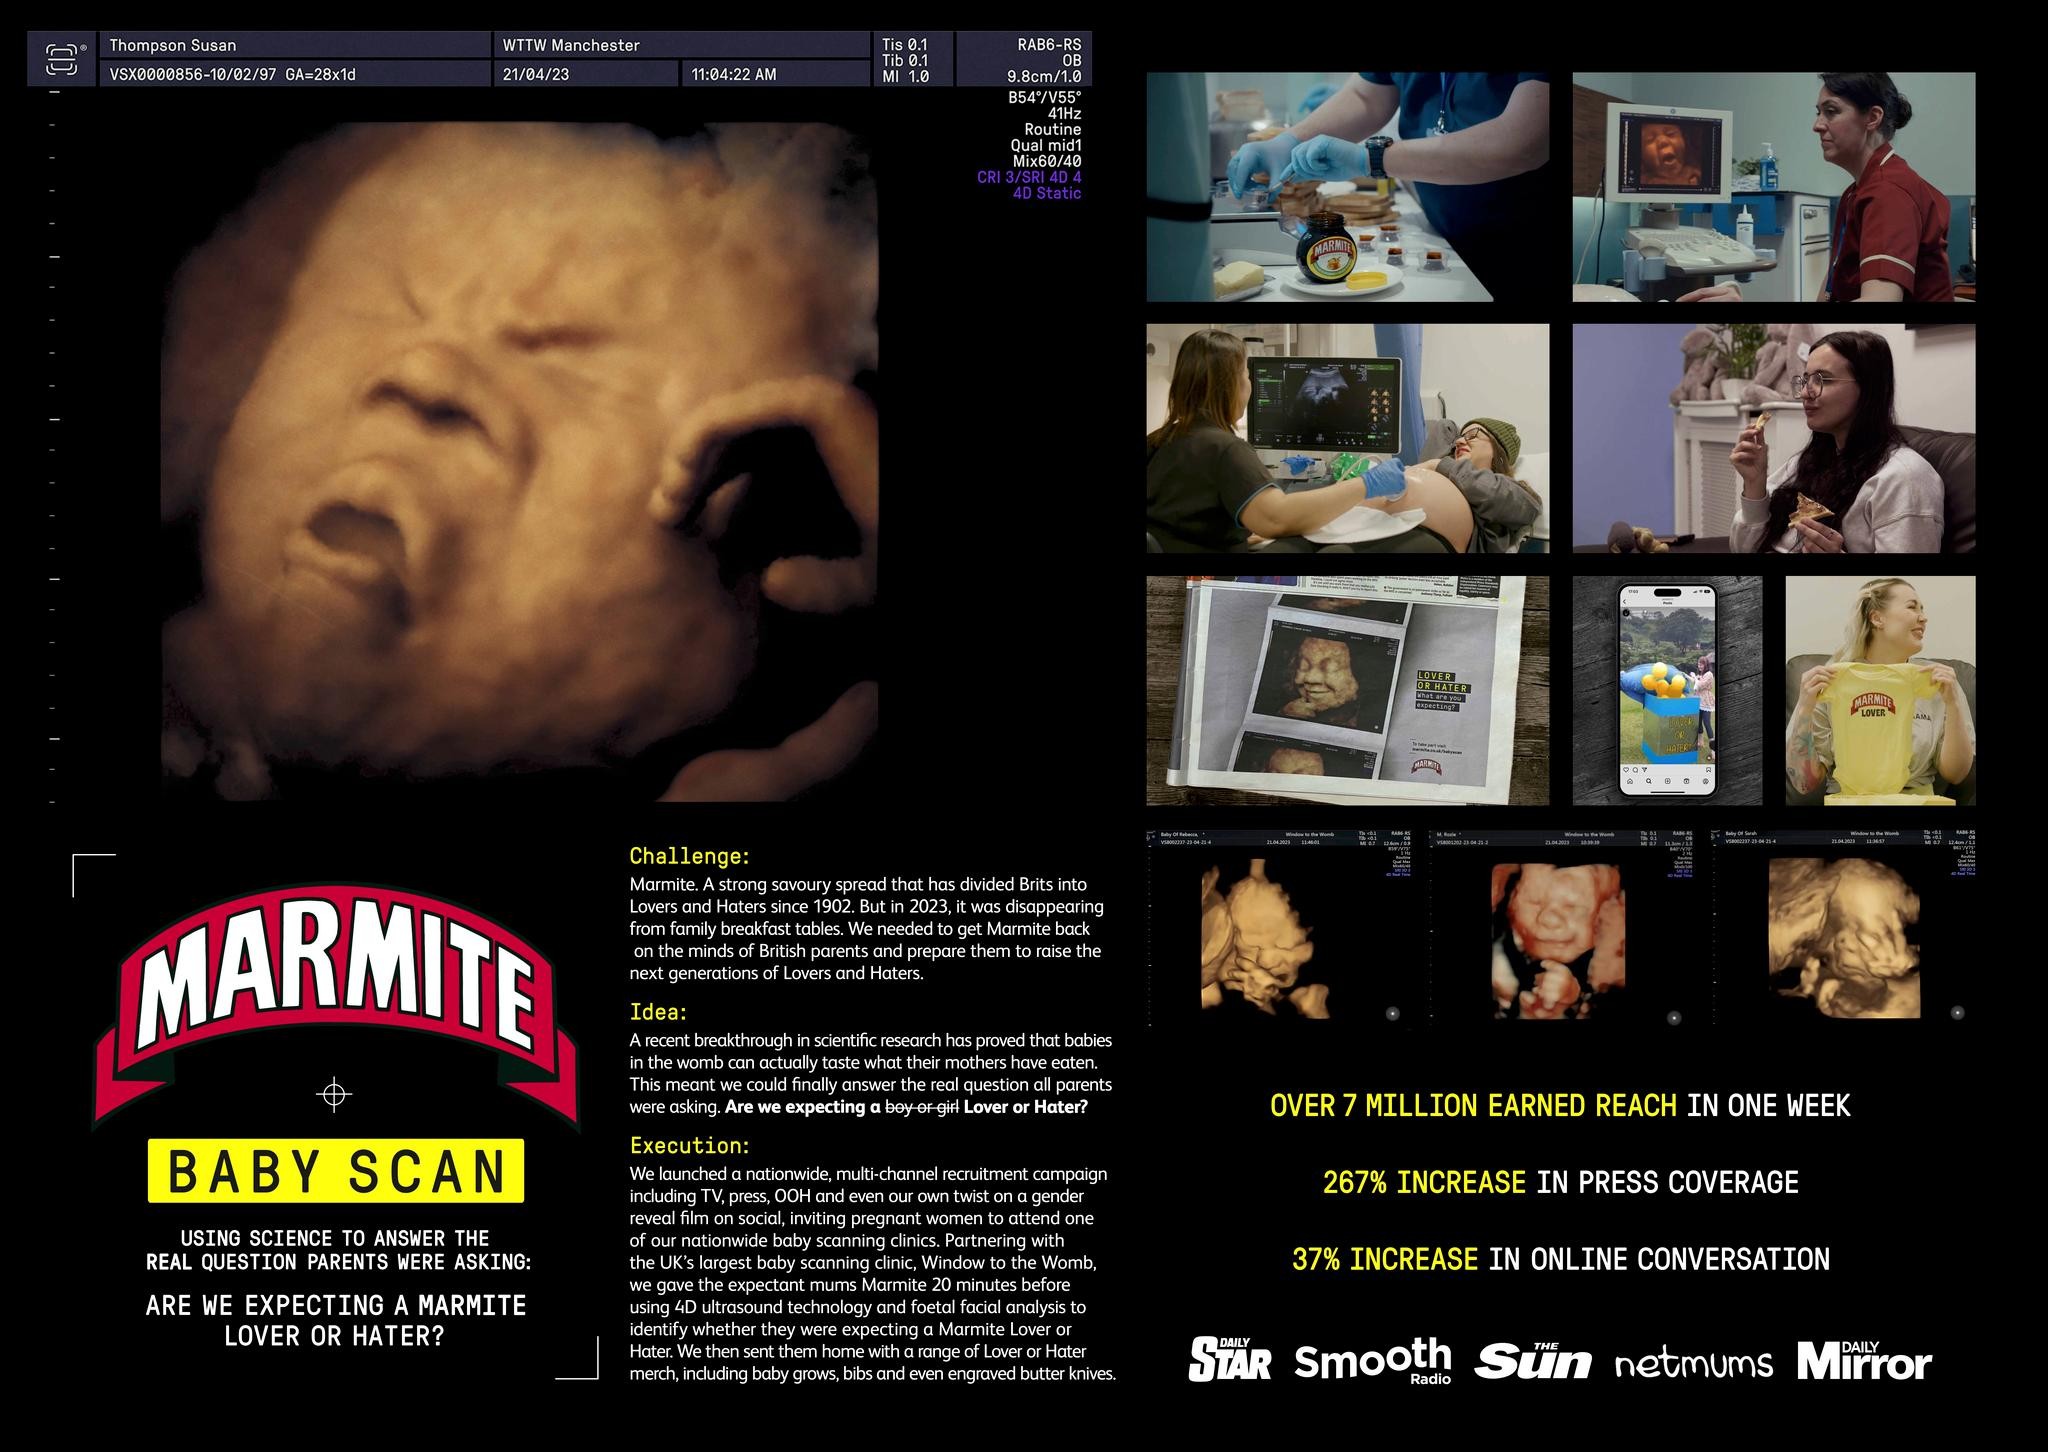 BABY SCAN